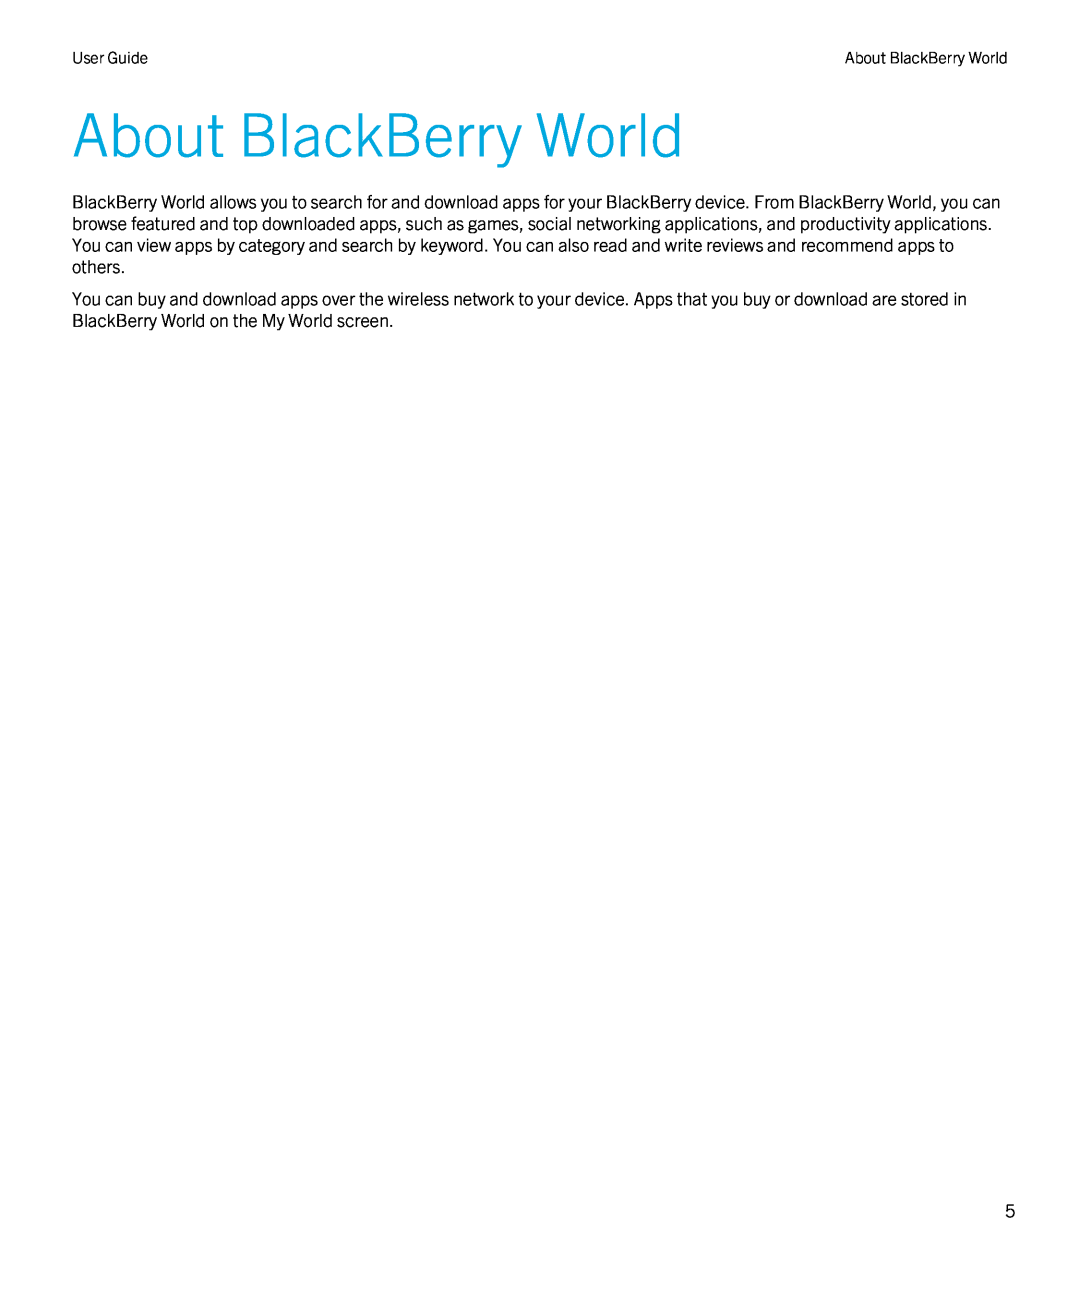 Blackberry 4.3 manual About BlackBerry World, User Guide 